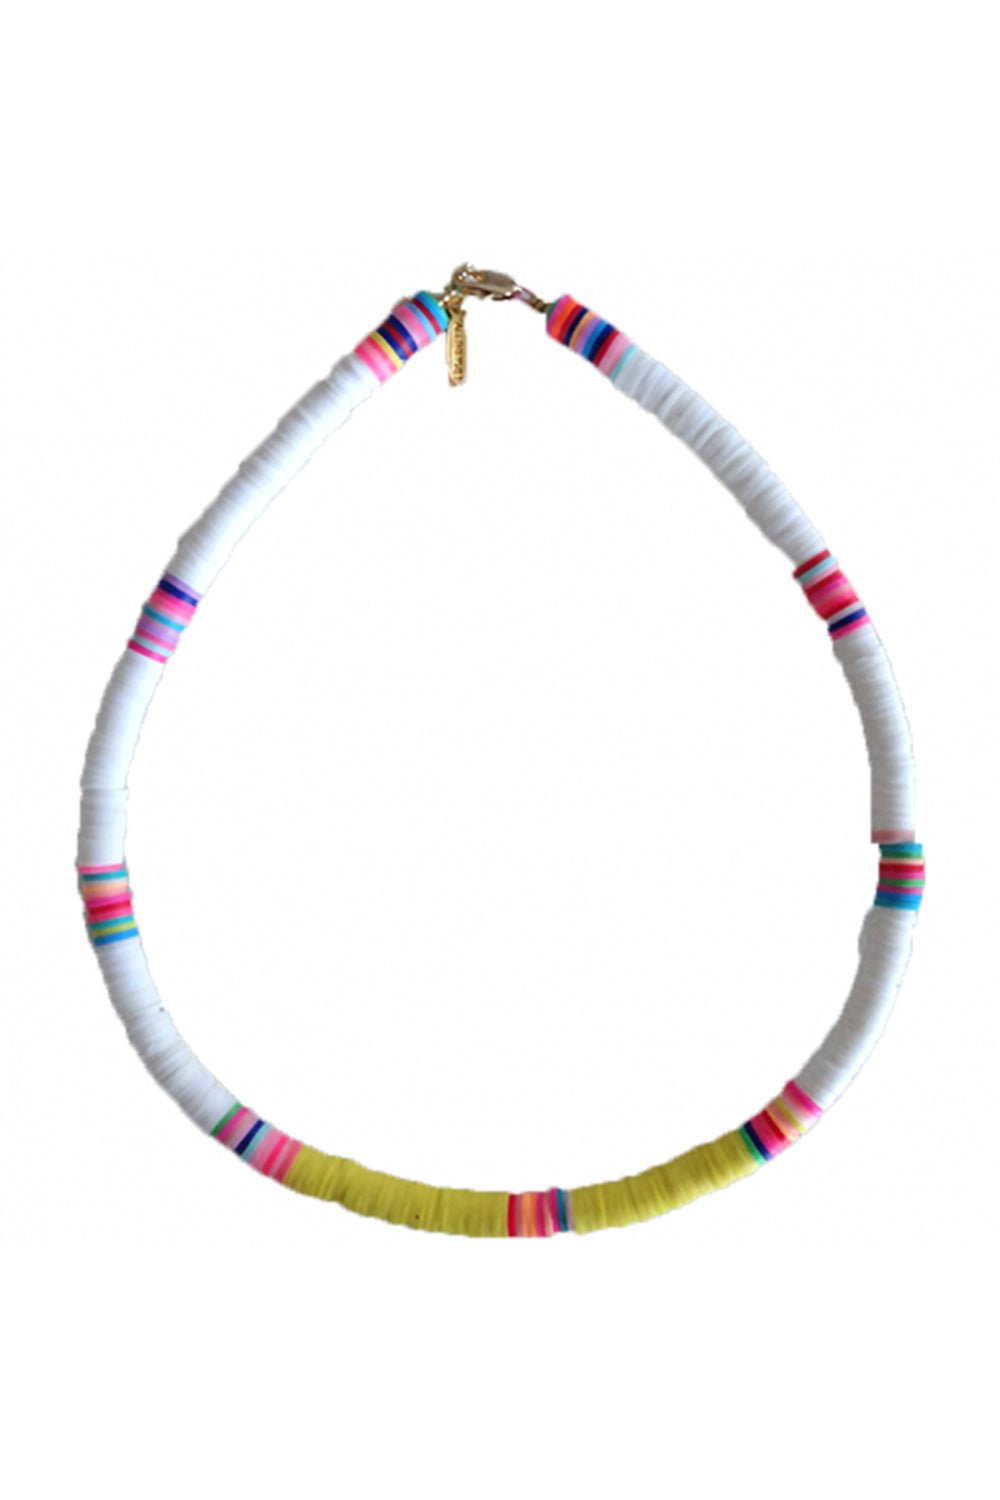 ALLTHEMUST Heishi Polymer Necklace - Solid & Striped